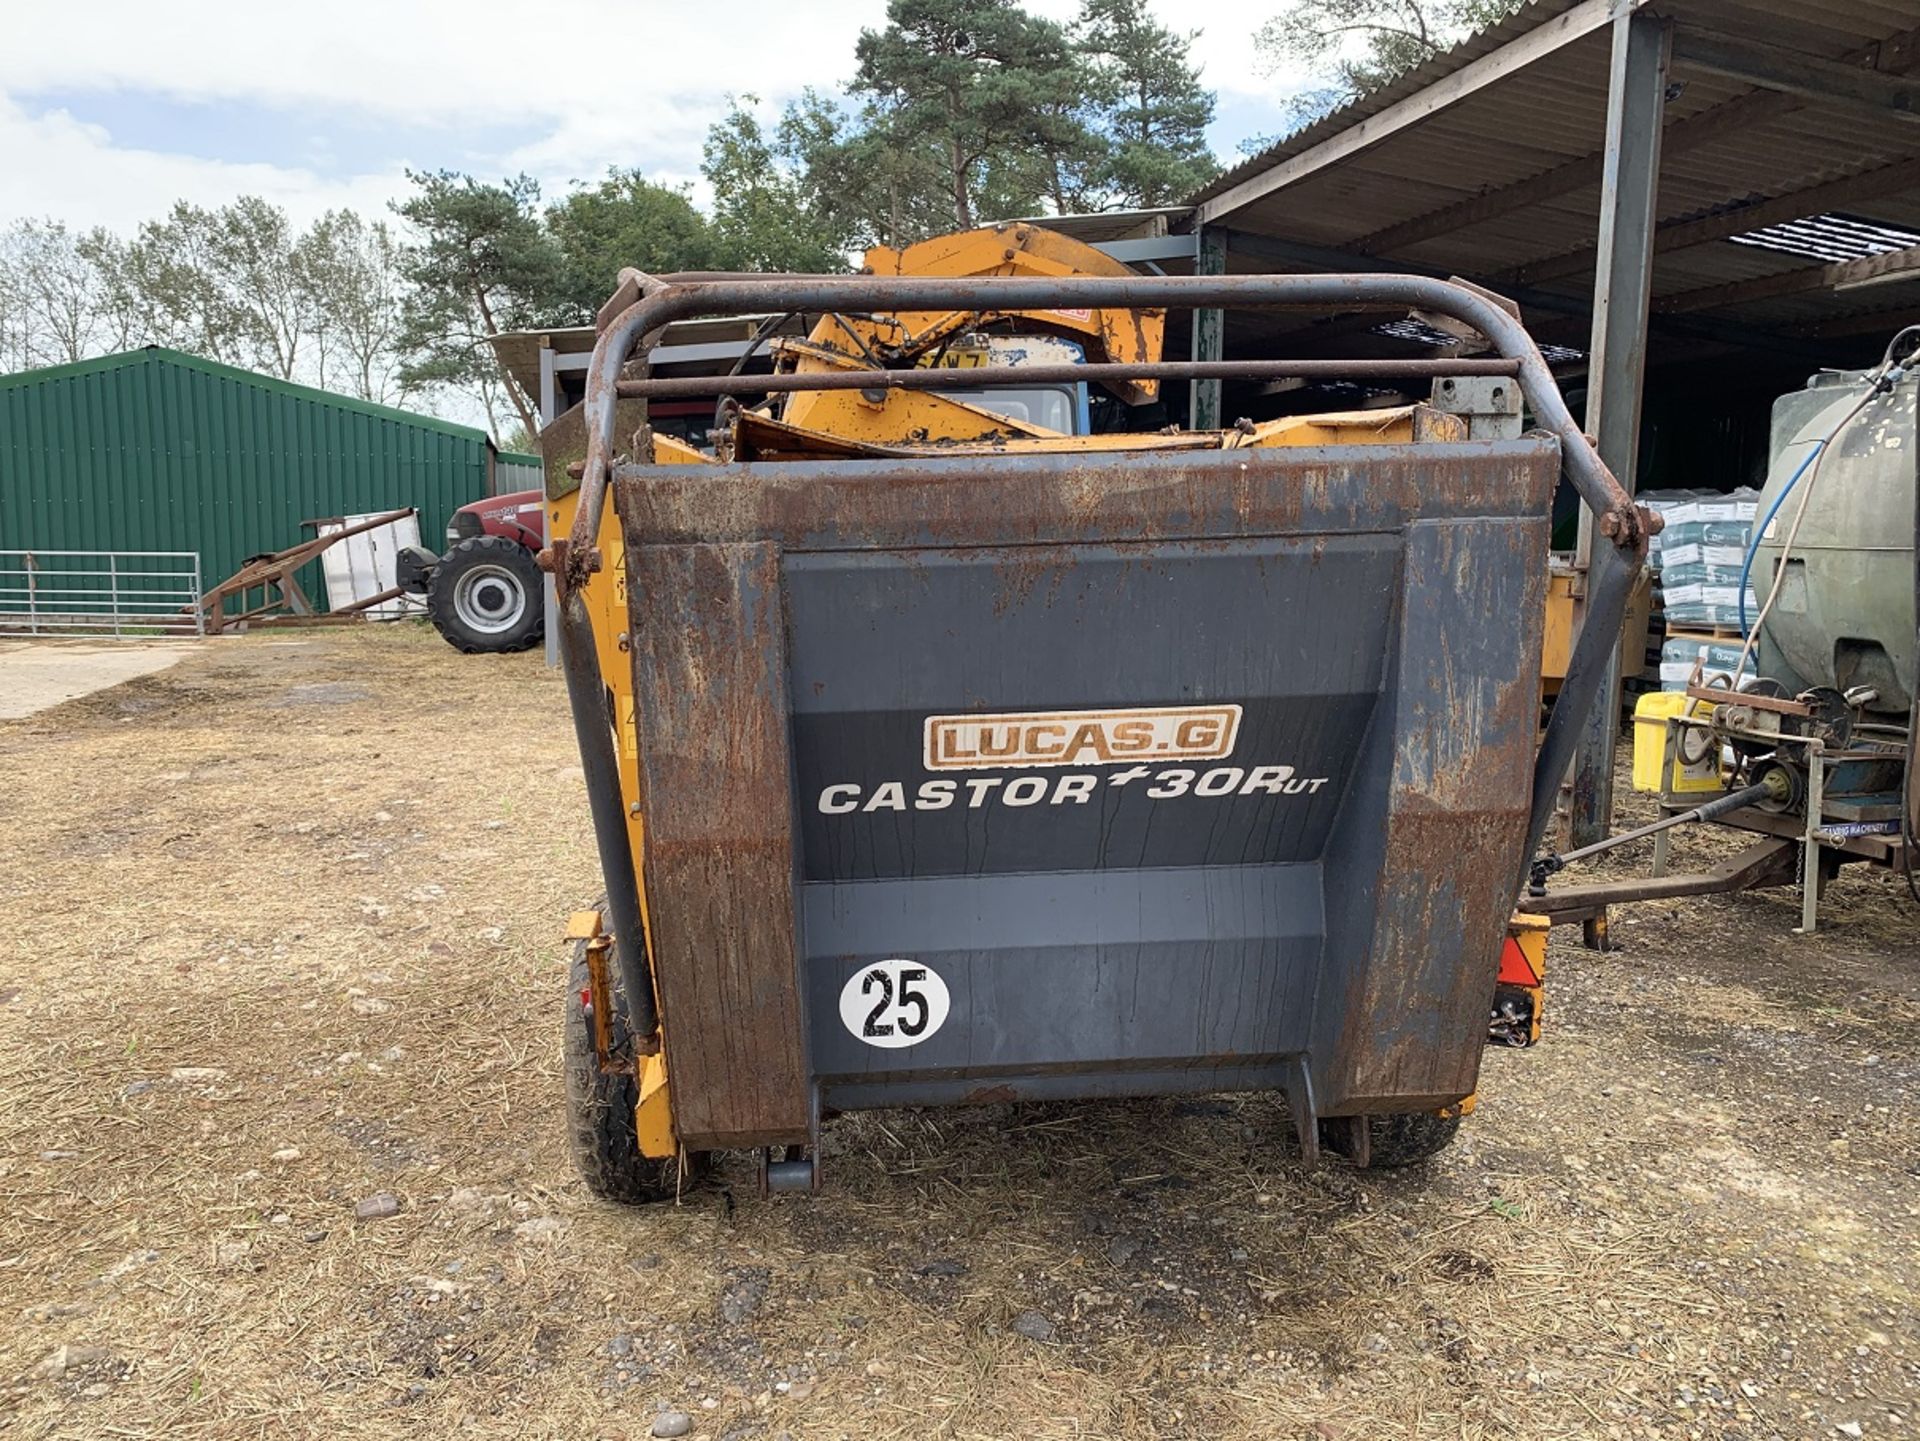 Lucas G Castor 30RUT Straw Chopper Blower Self Loading, Cable controlled Located near Beccles, - Image 4 of 5